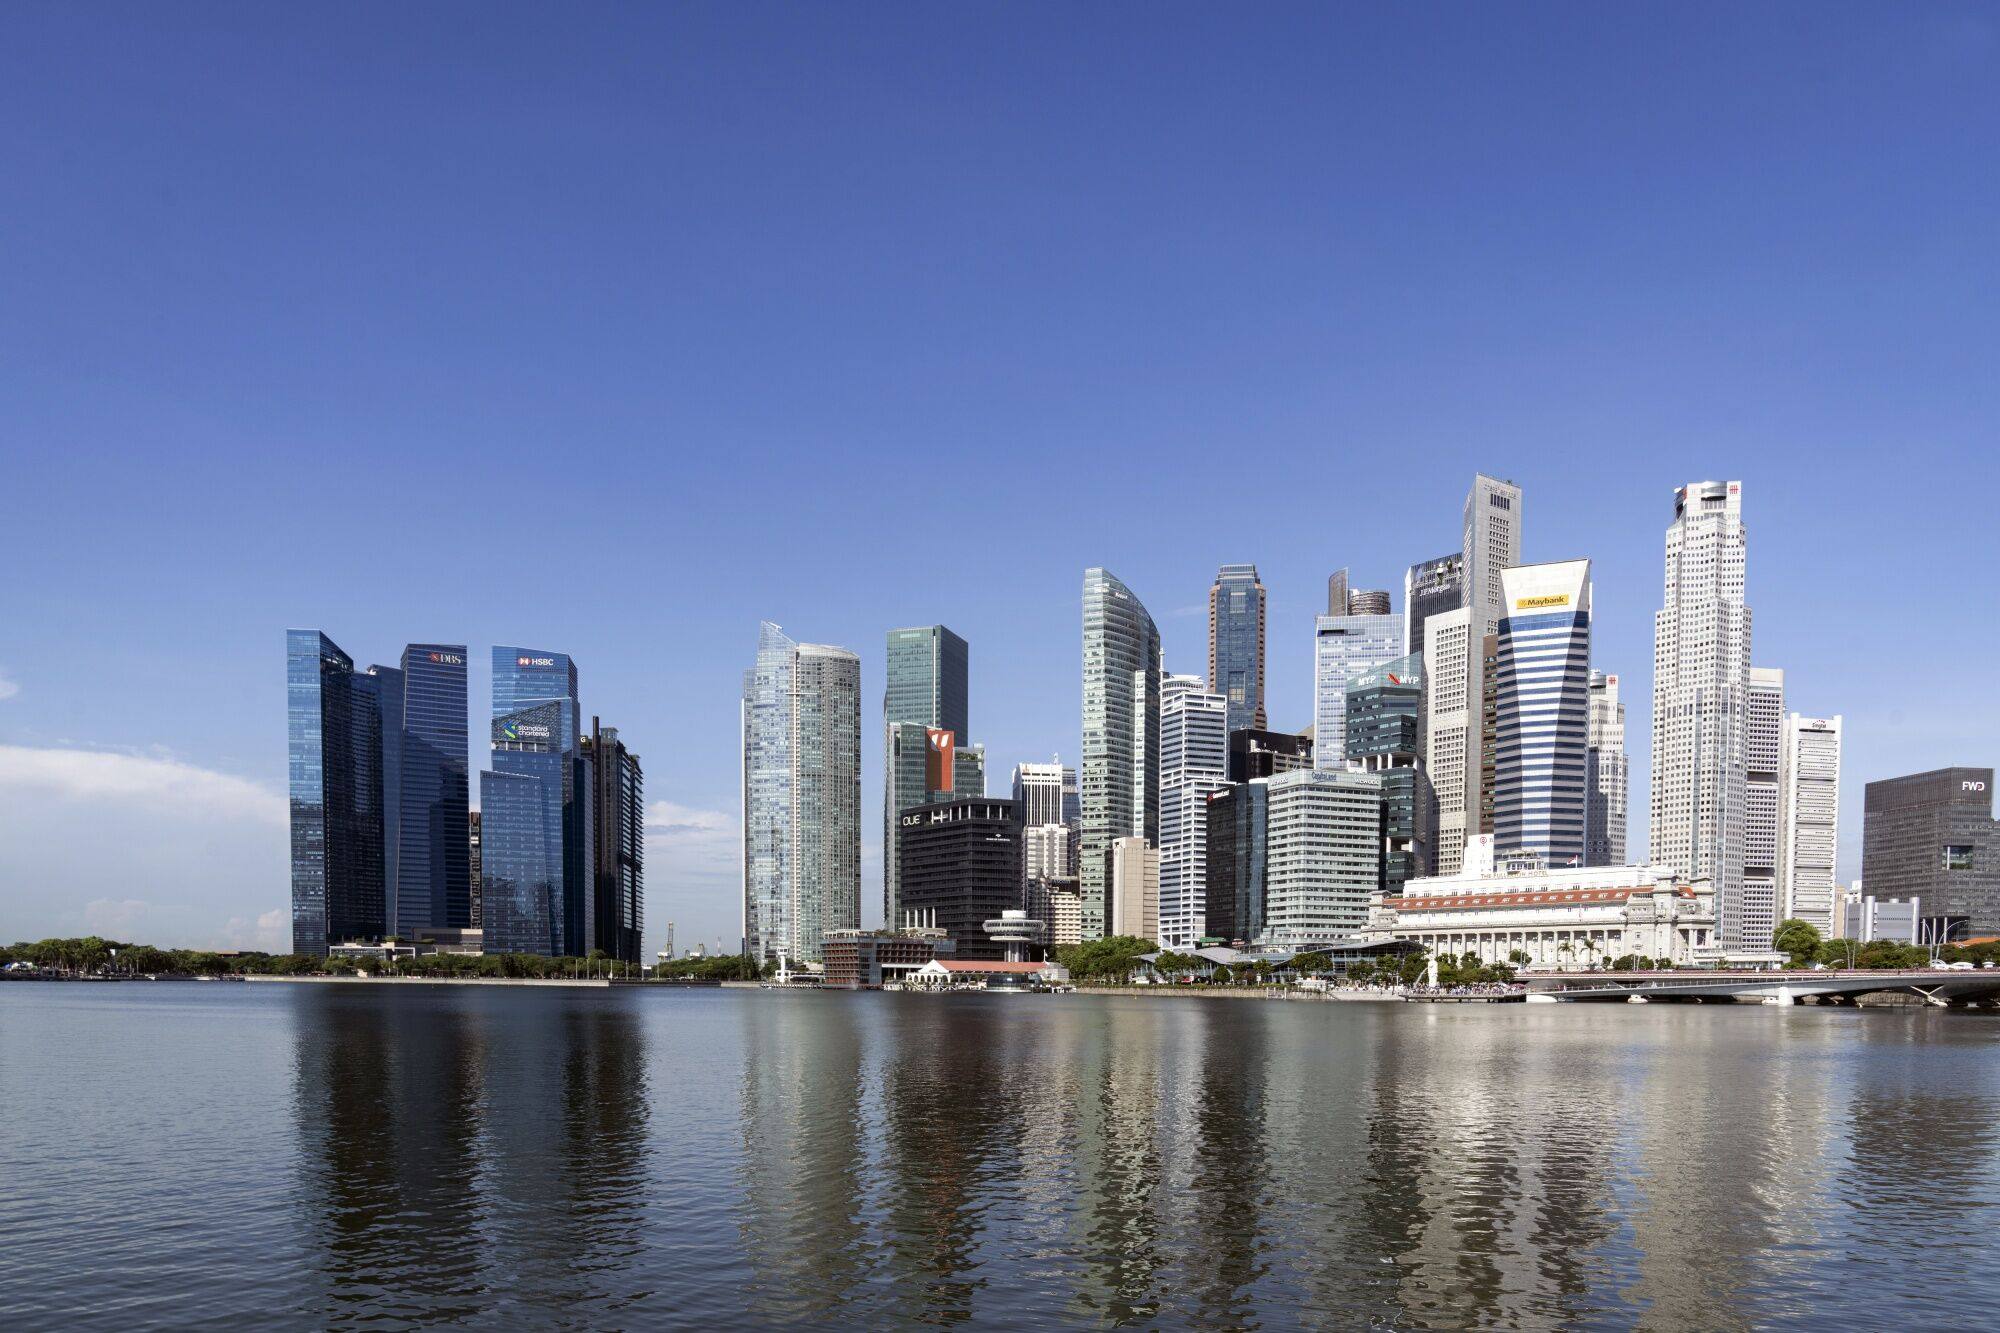 Singapore’s skyline. A man was sentenced to two years’ jail for ill-treating his child. Photo: Bloomberg